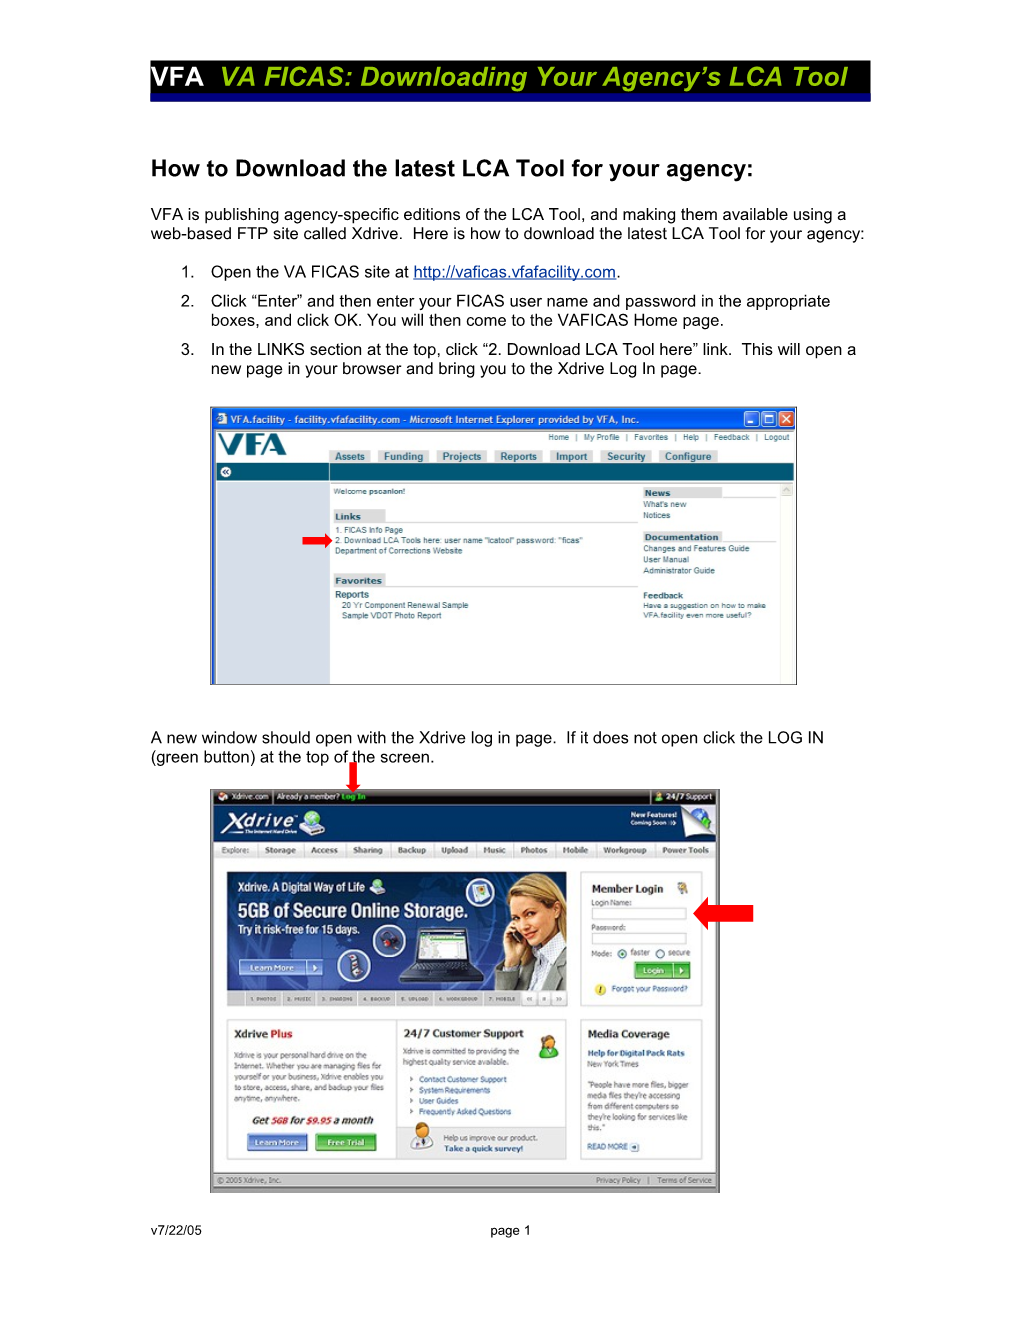 How to Download the Latest LCA Tool for Your Agency